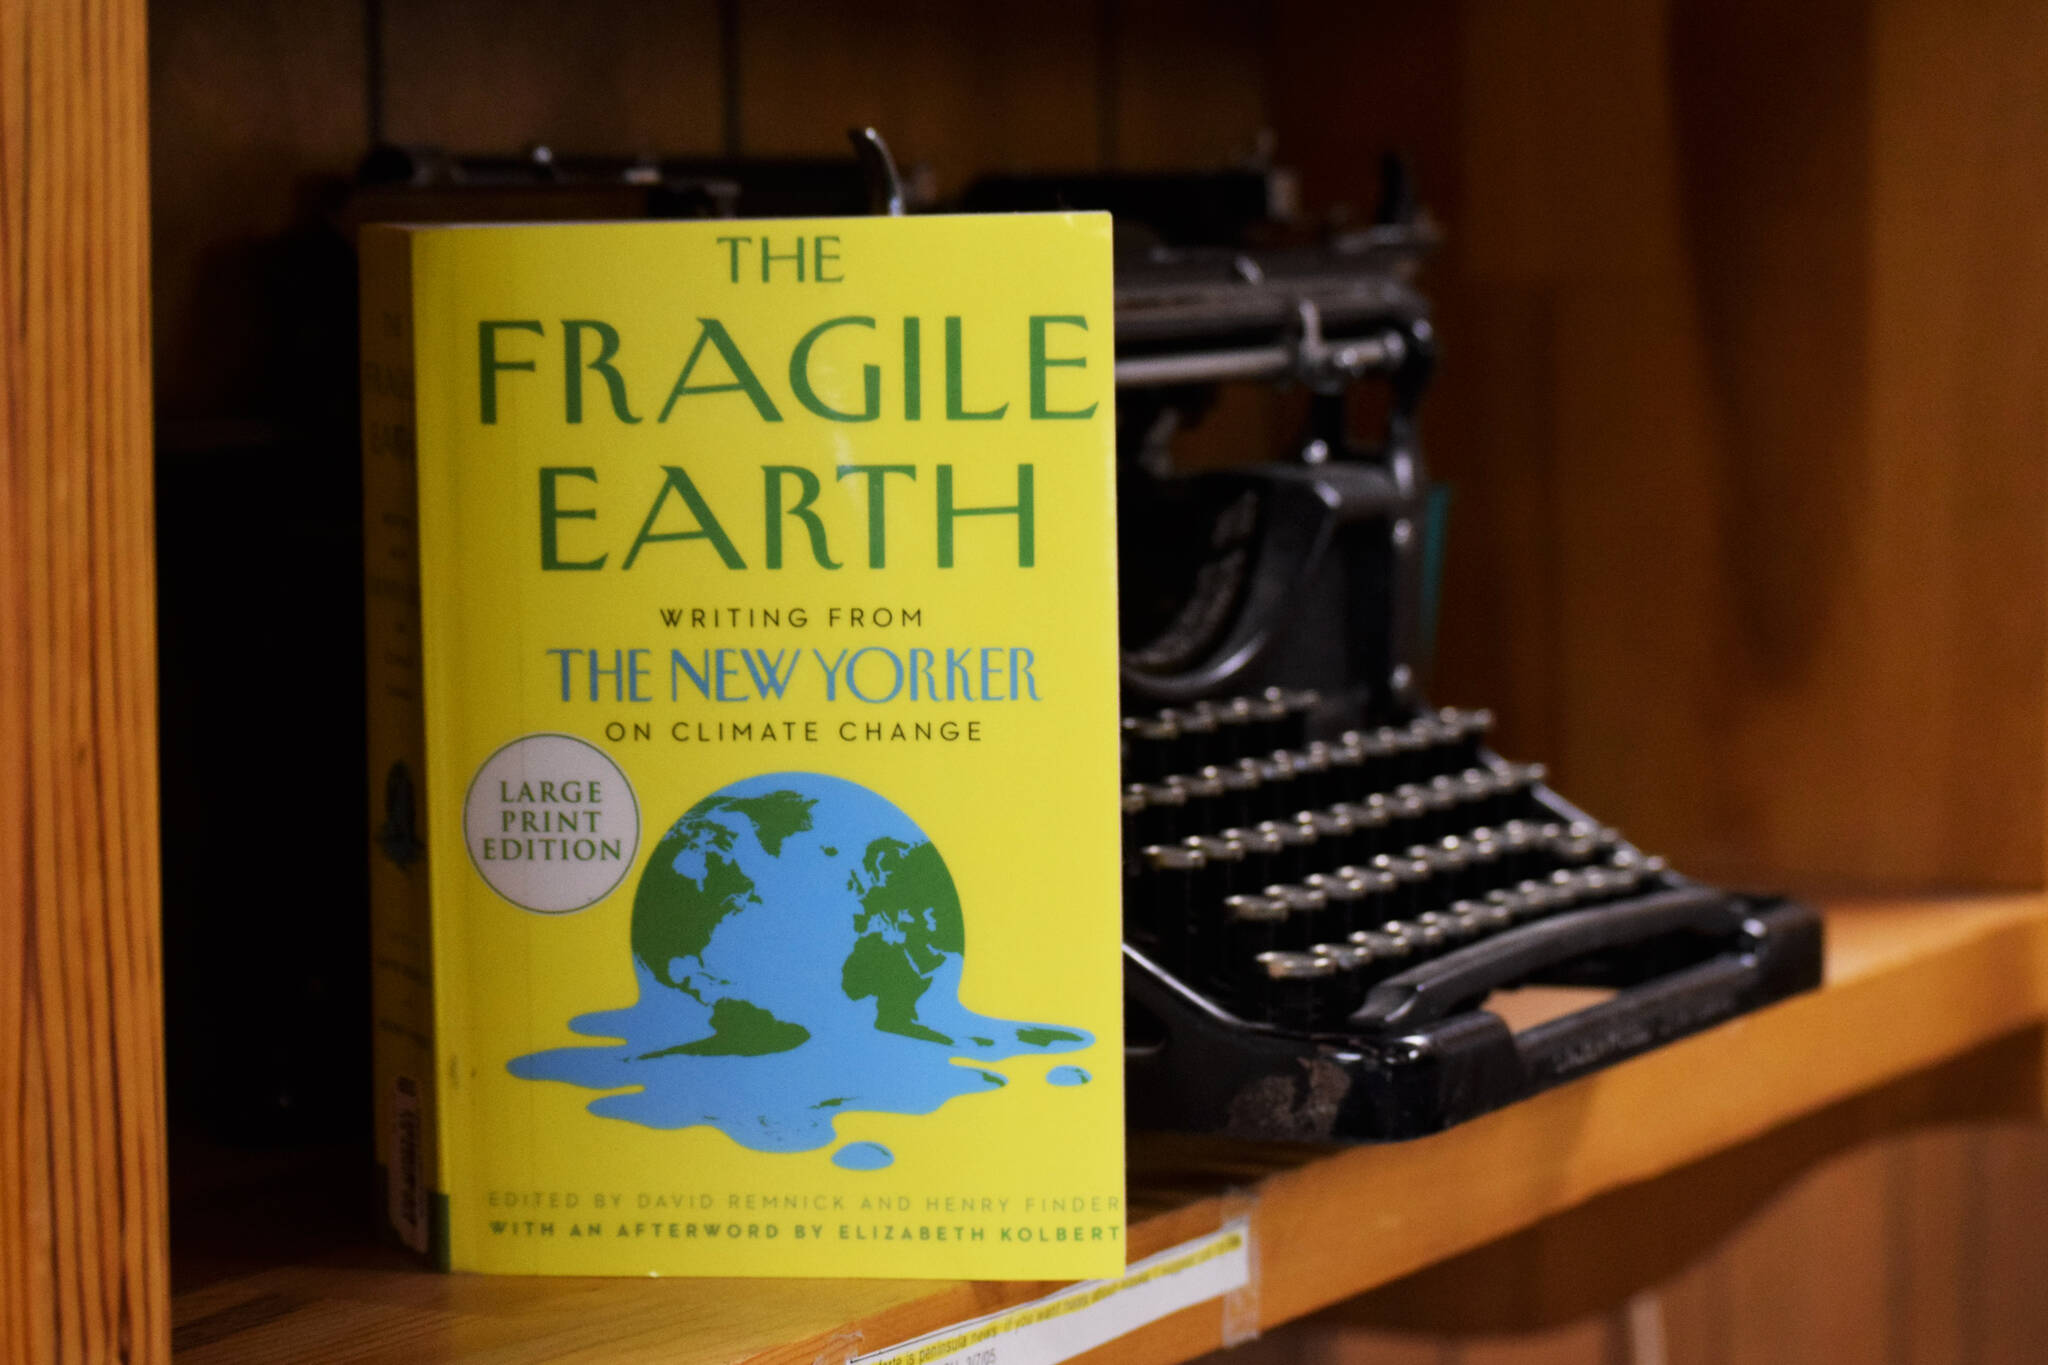 A copy of “The Fragile Earth” rests on a typewriter on Wednesday, May 18, 2022 in Kenai, Alaska. (Ashlyn O’Hara/Peninsula Clarion)